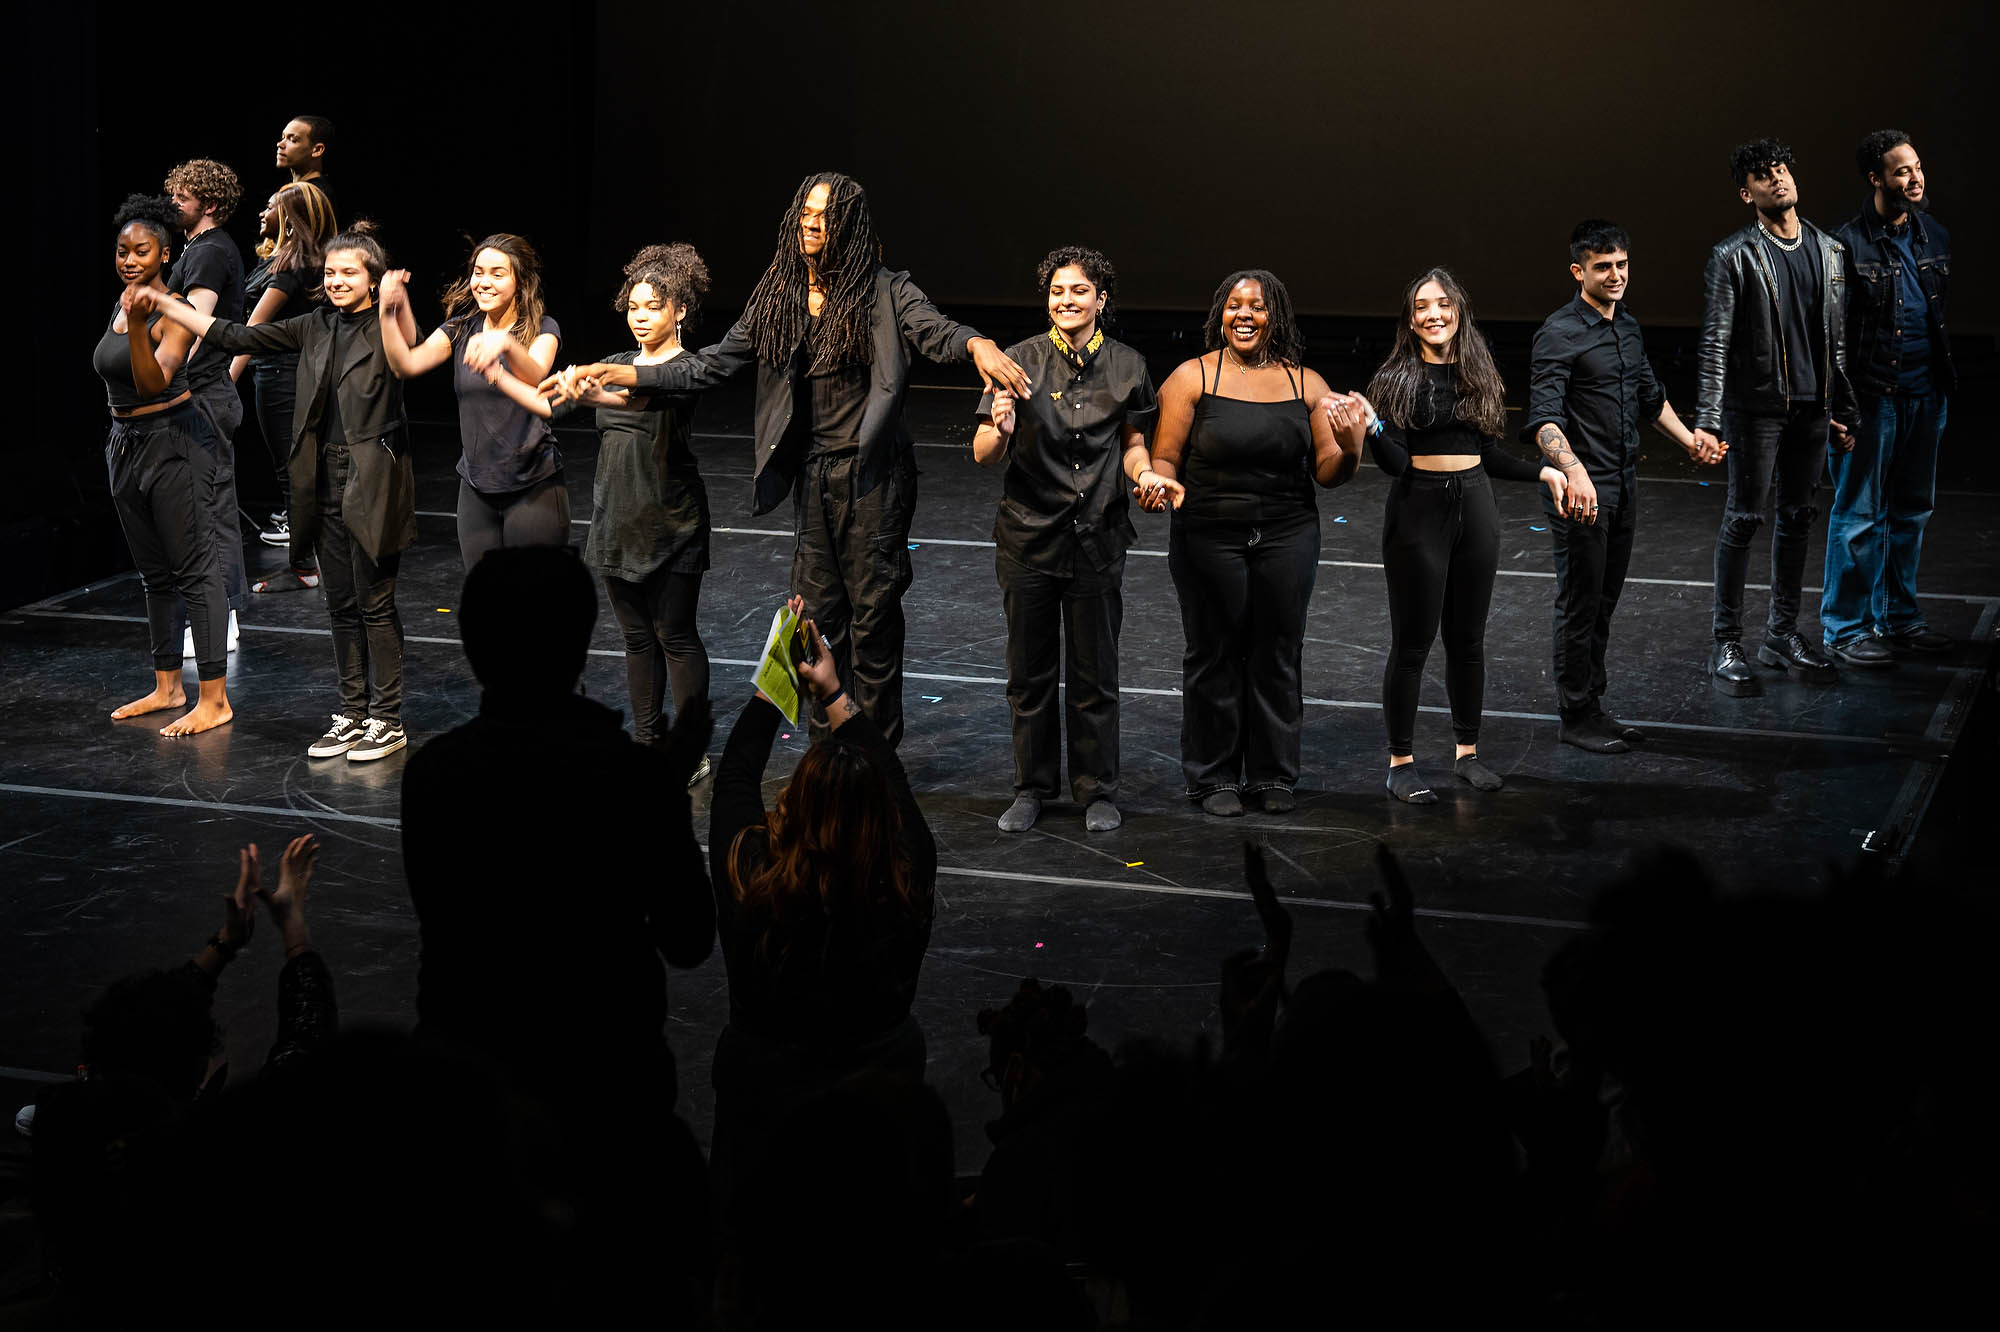 A large group of performers wearing black hold hands and bow on stage.